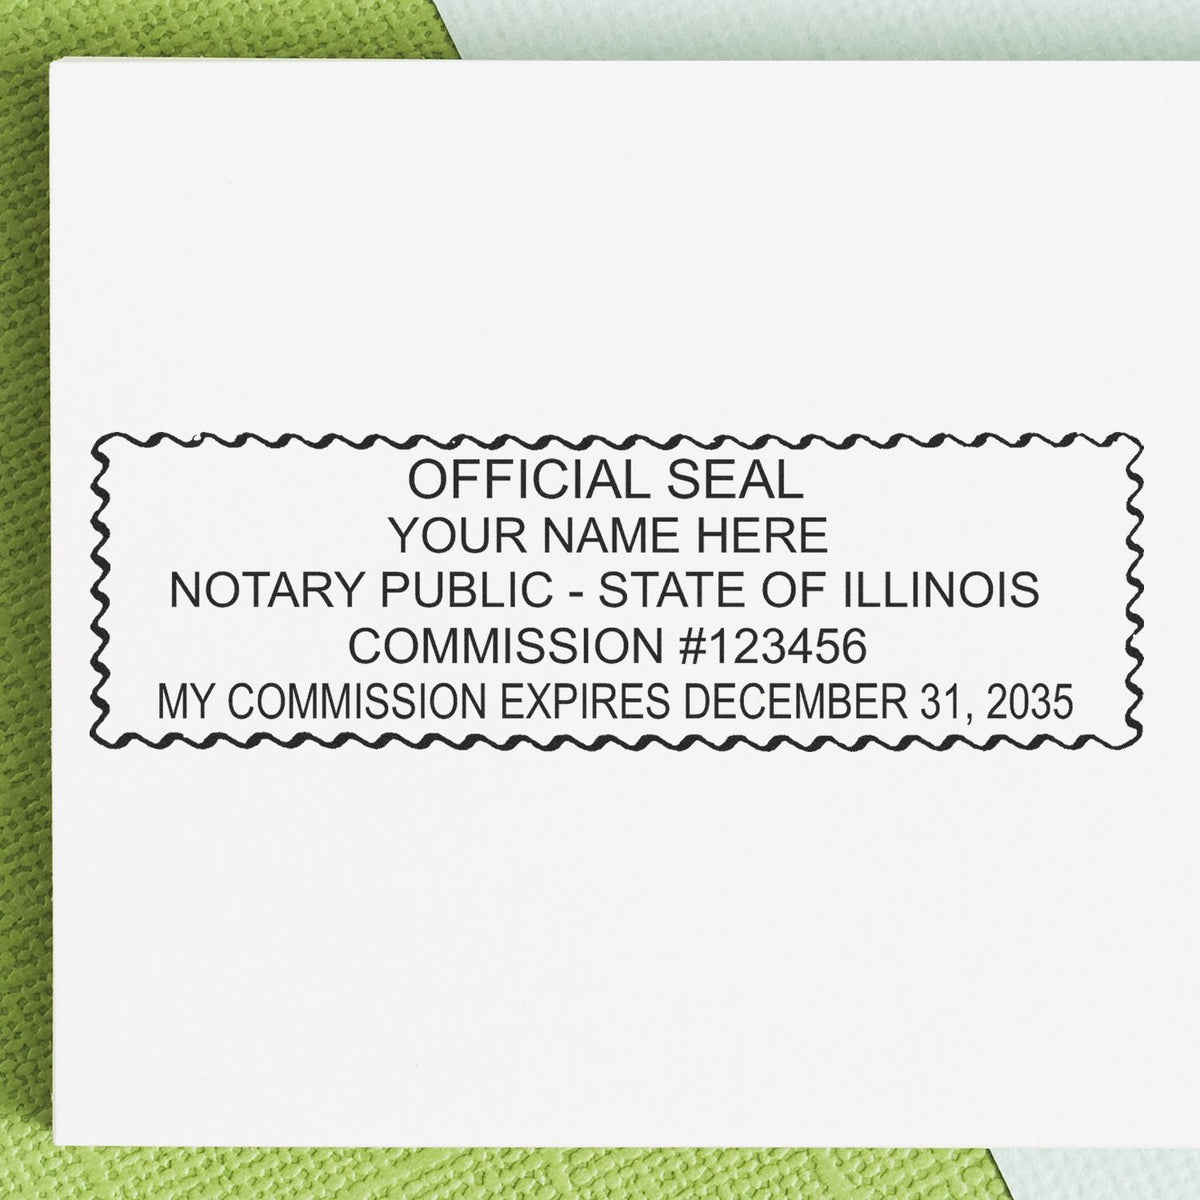 A lifestyle photo showing a stamped image of the Heavy-Duty Illinois Rectangular Notary Stamp on a piece of paper